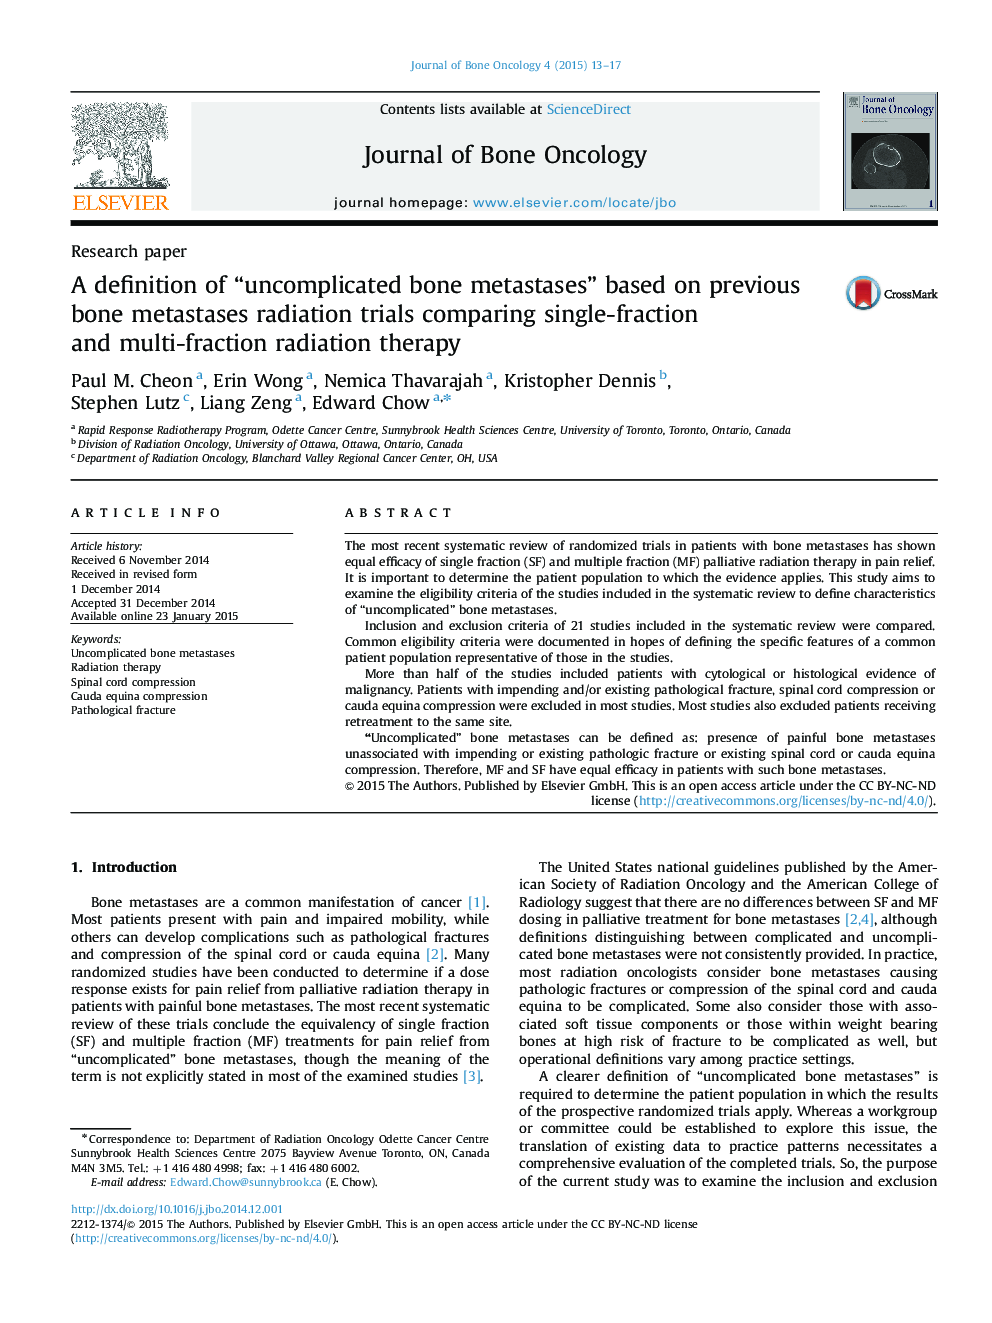 A definition of “uncomplicated bone metastases” based on previous bone metastases radiation trials comparing single-fraction and multi-fraction radiation therapy